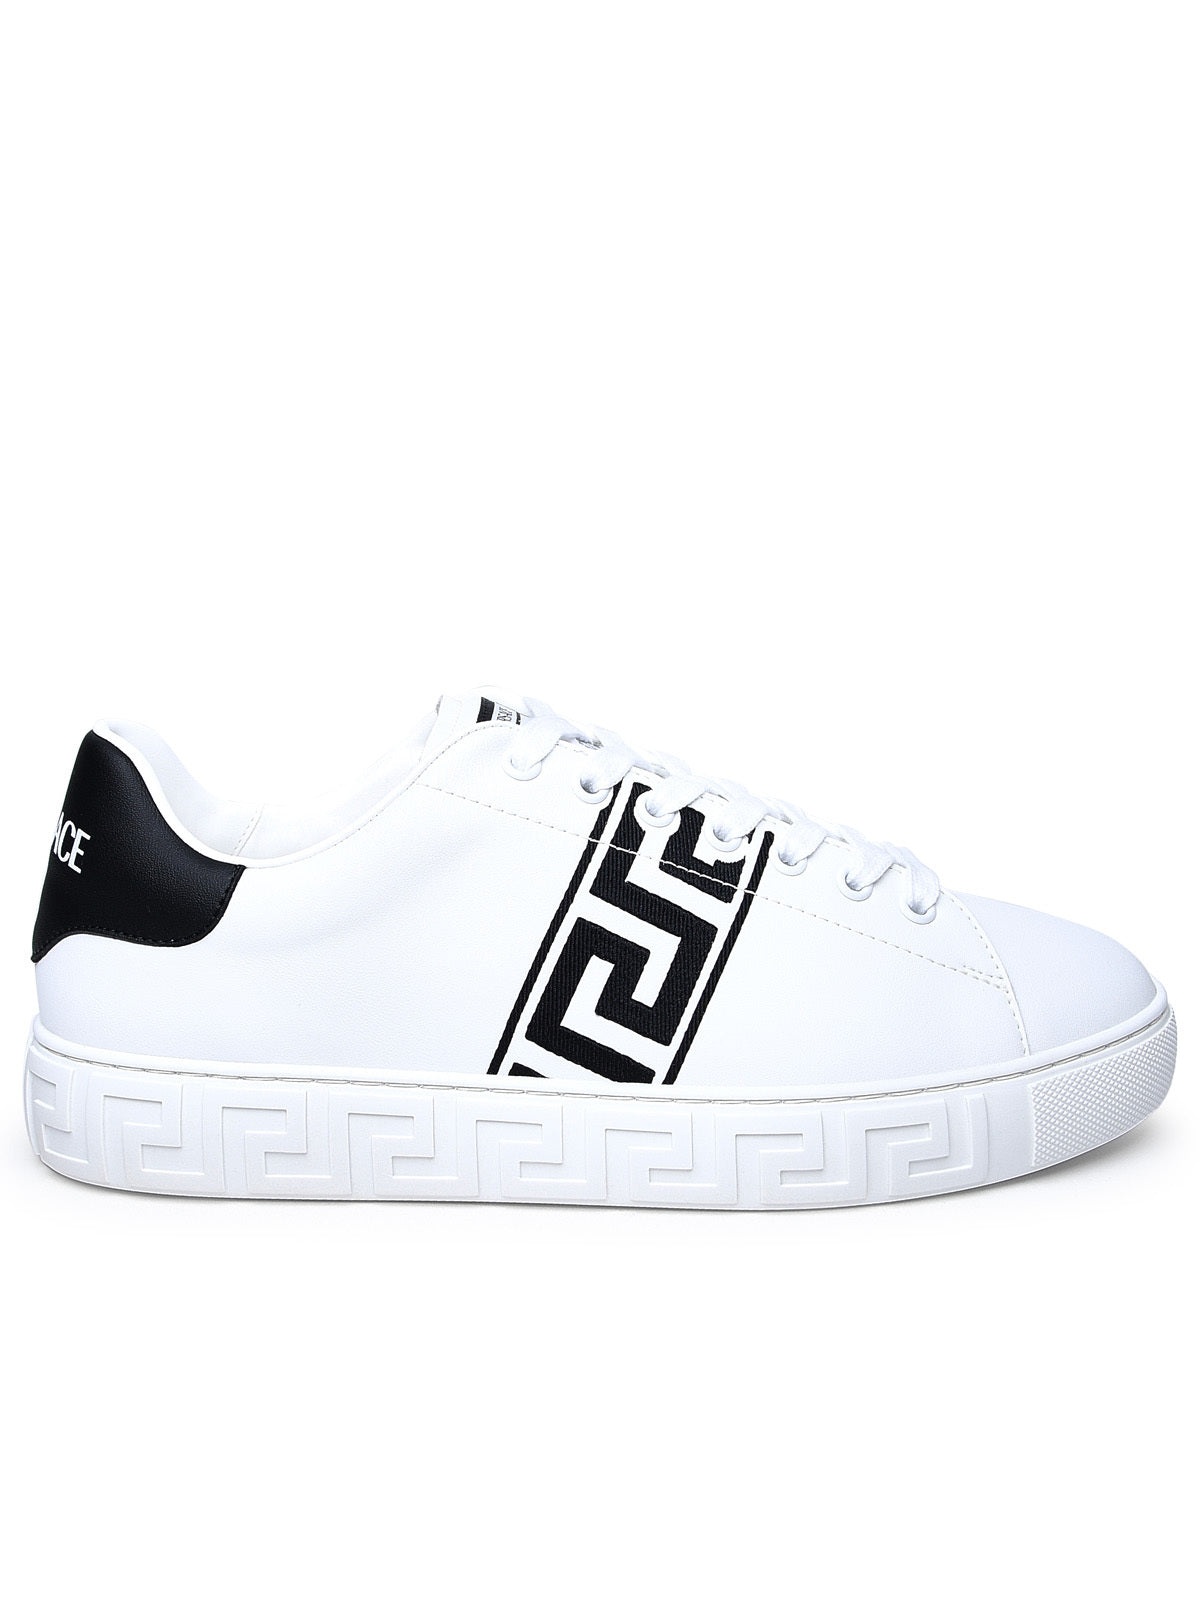 Versace Uomo White Leather Sneakers - 1